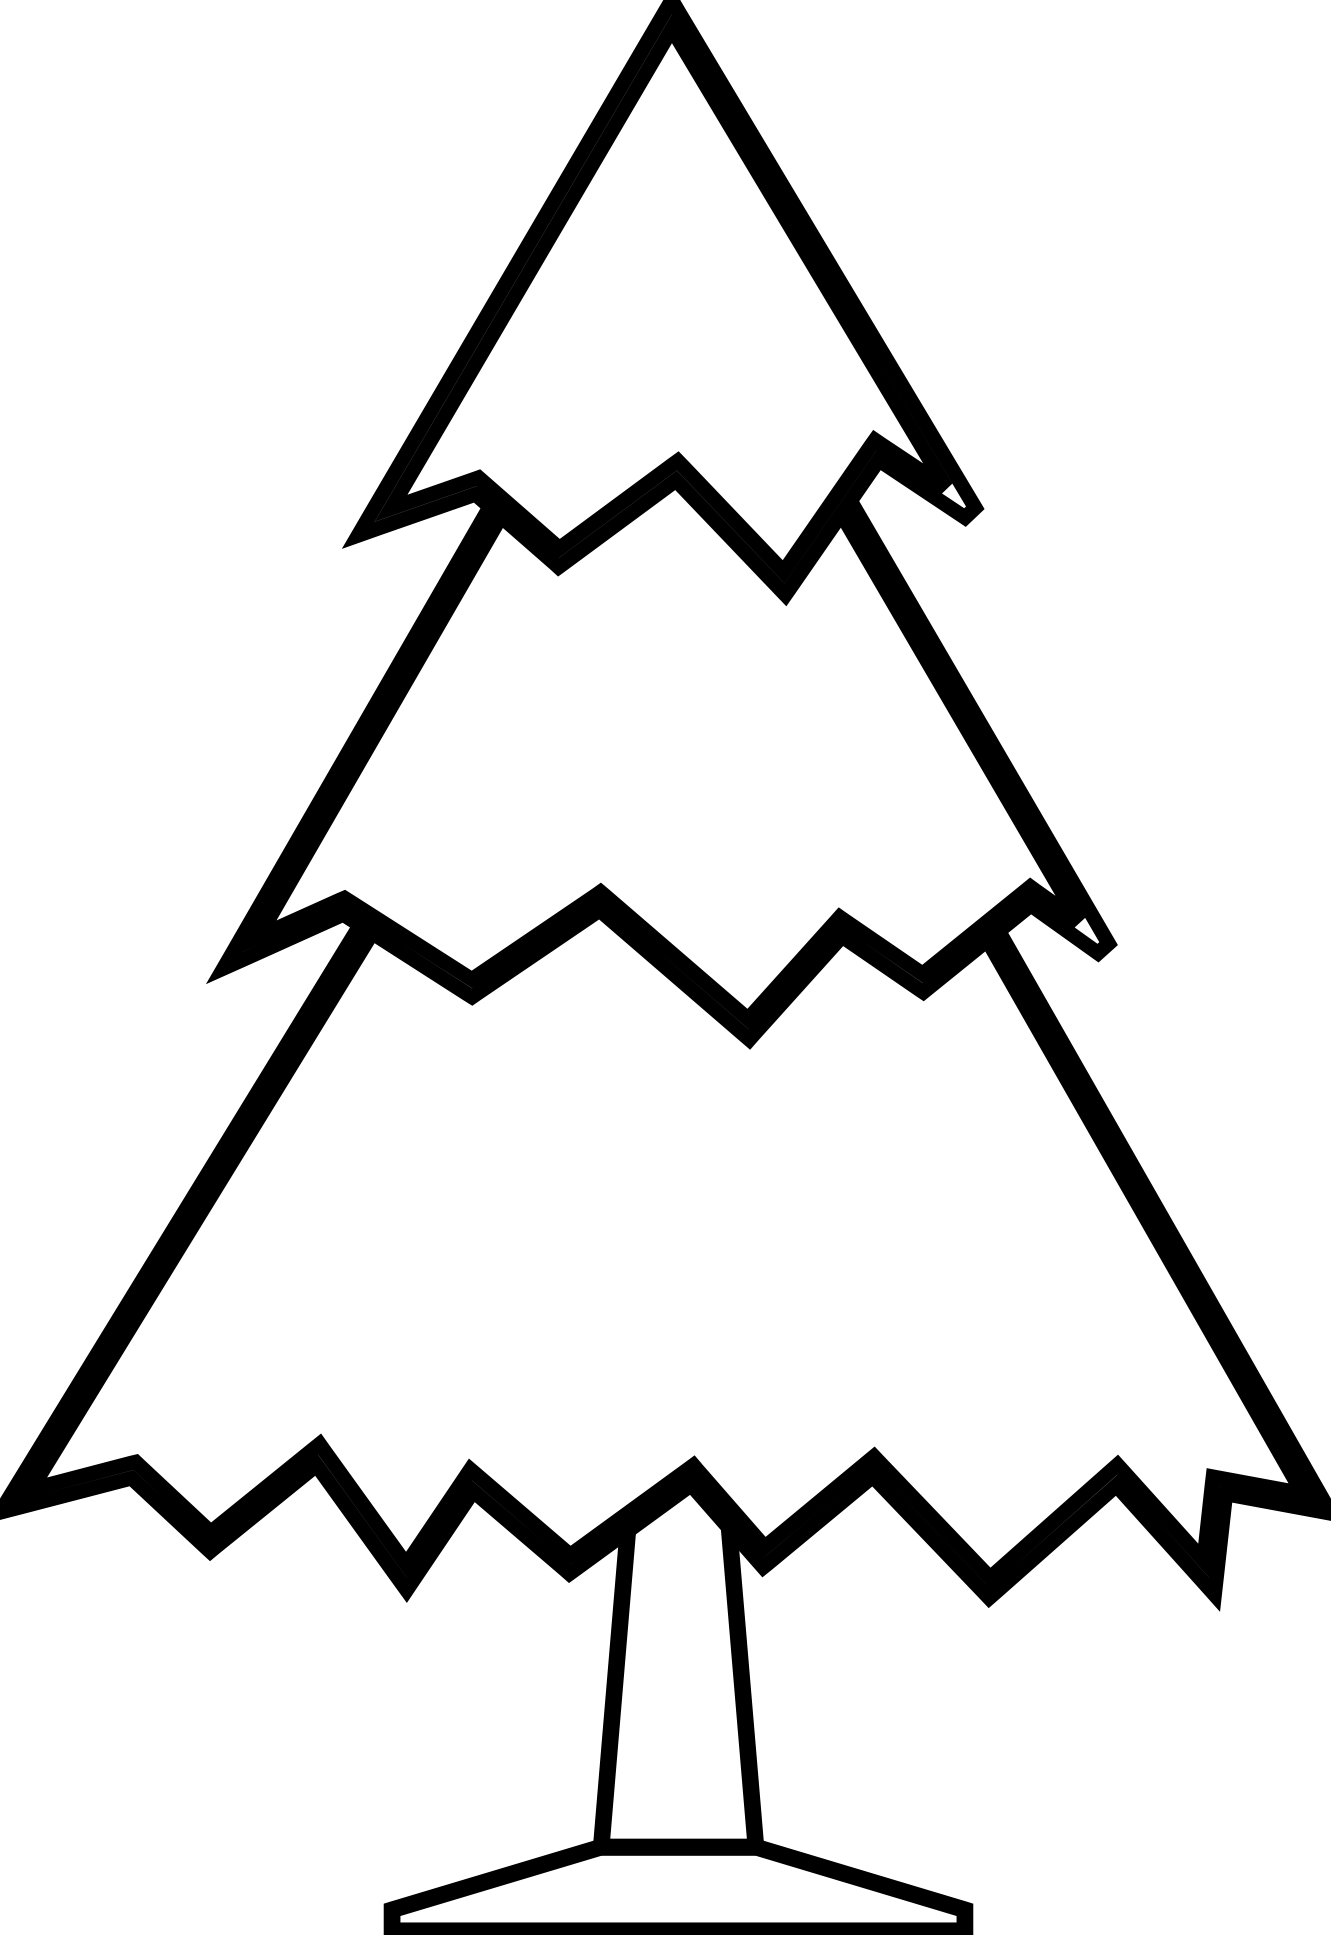 Black And White Family Tree . - Christmas Tree Clipart Black And White